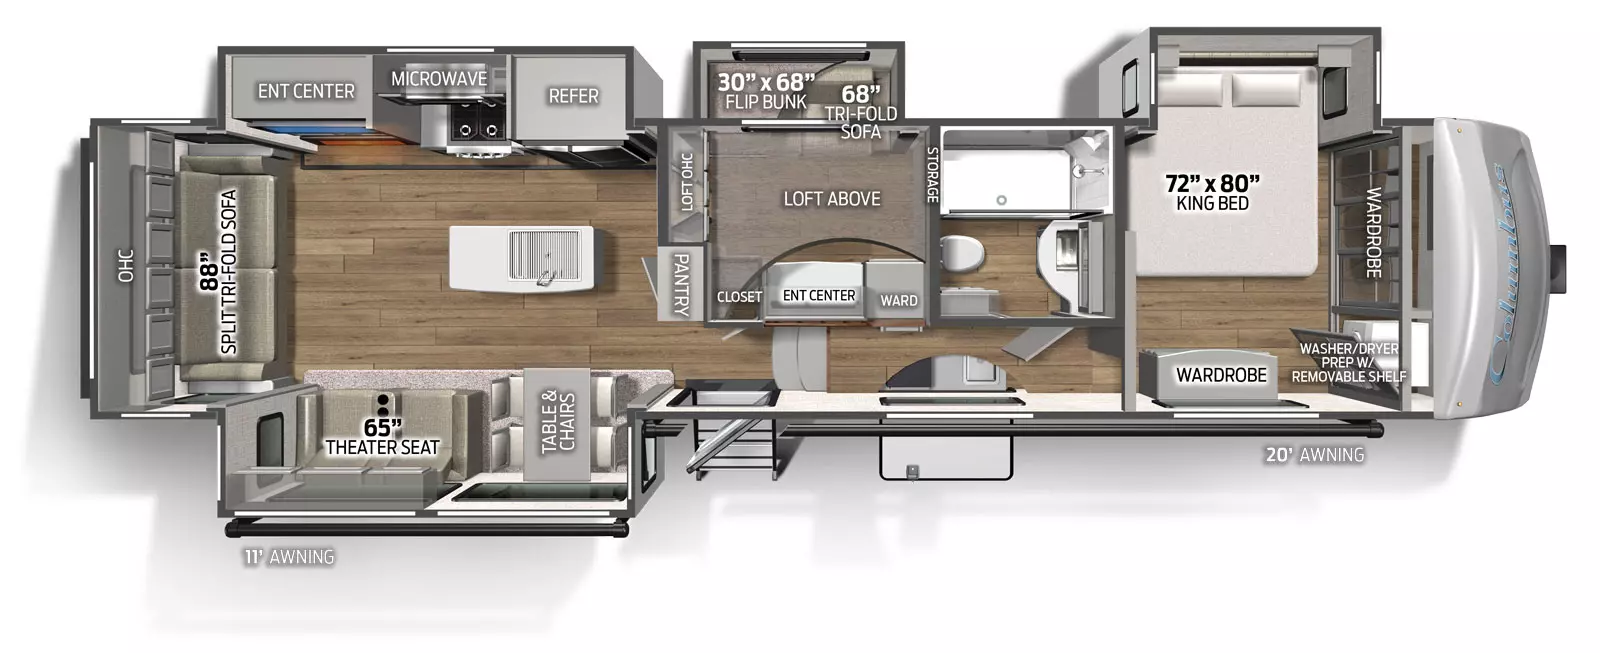 The 379MB has 4 slide outs, 3 on the road side and one on the camp side, along with one entry door on the camp side. Interior layout from front to back: front bedroom with king bed in a slide out; side aisle bathroom; bunk room with road side slide out containing trifold sofa and upper bunk, and cabinetry with TV hookups and loft area above the bunk room; kitchen living dining area with road side slide out containing cooktop and oven, residential refrigerator and TV entertainment area. The camp side slide out containing freestanding table and chairs and theater seating. Kitchen island with double basin sink. Camp side outside kitchen in compartment with sink and mini fridge.  